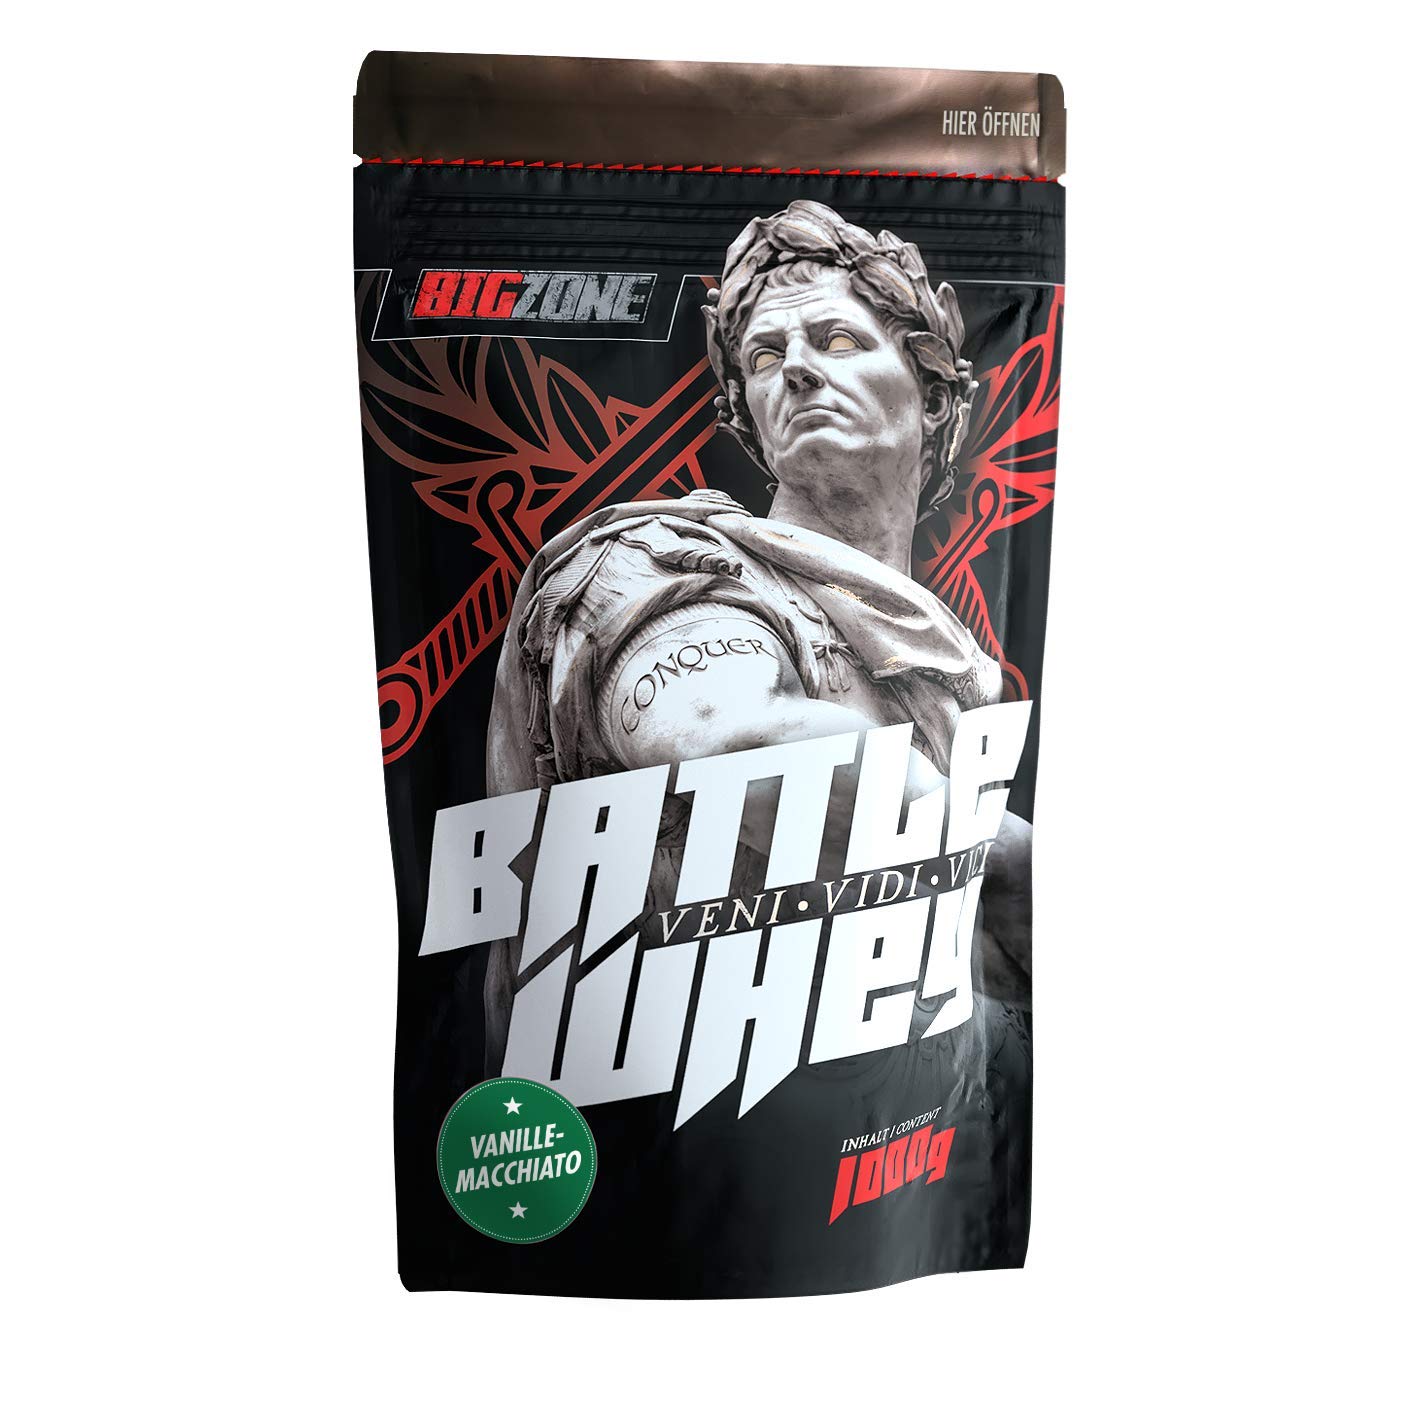 Big Zone BATTLE WHEY | Whey Protein Concentrate Eiweiss | Lecker Qualität Made in Germany | 1000g 1KG Pulver (Vanille Macchiato)